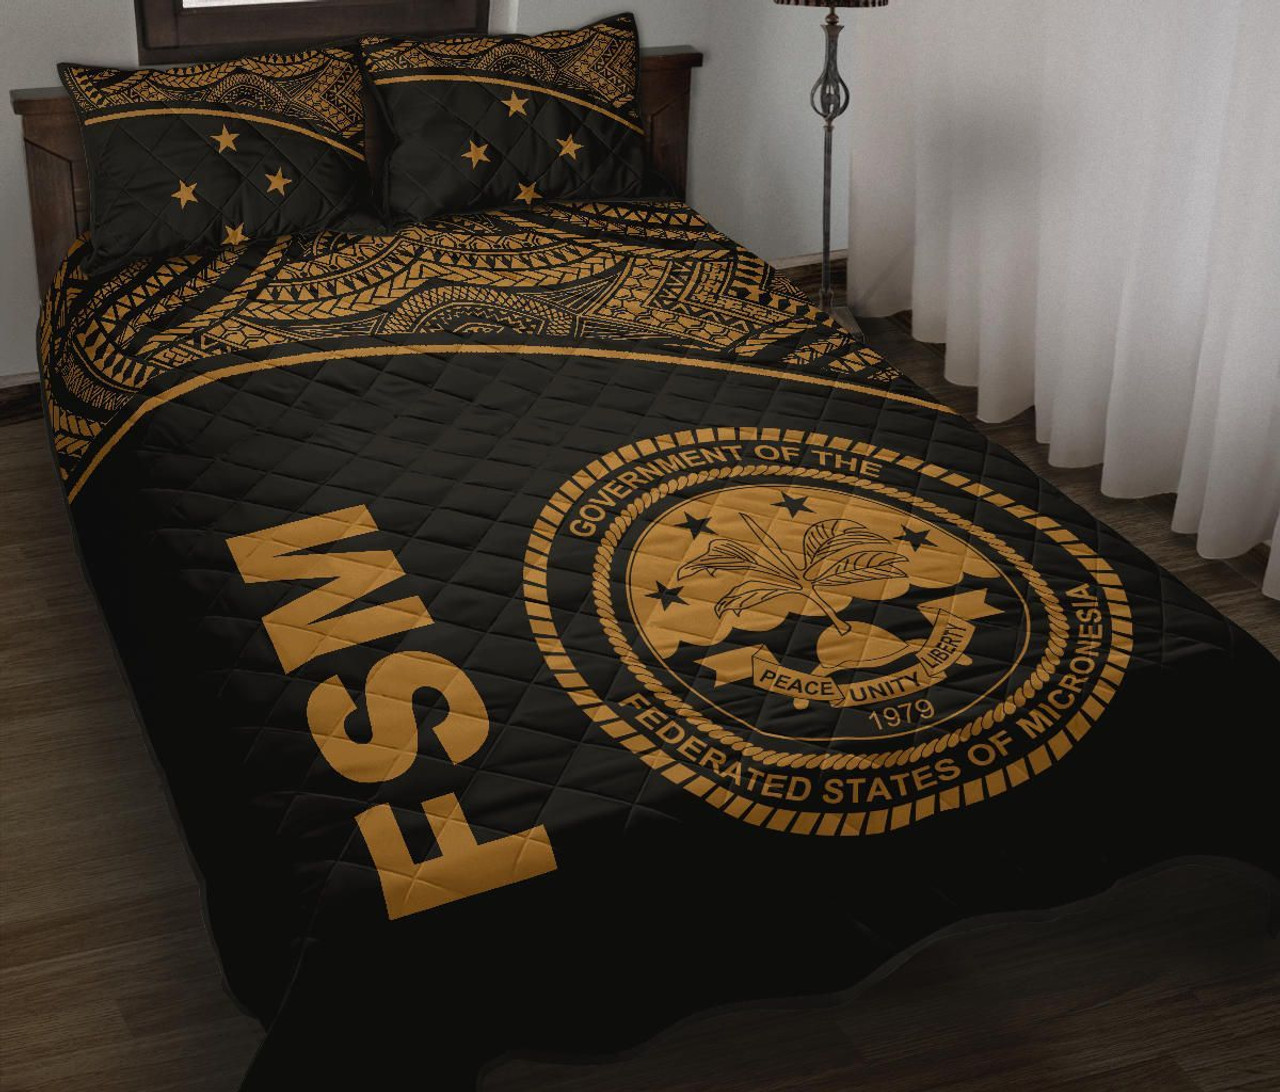 Federated States of Micronesia Quilt Bed Set - Federated States of Micronesia Seal Curve Version 2